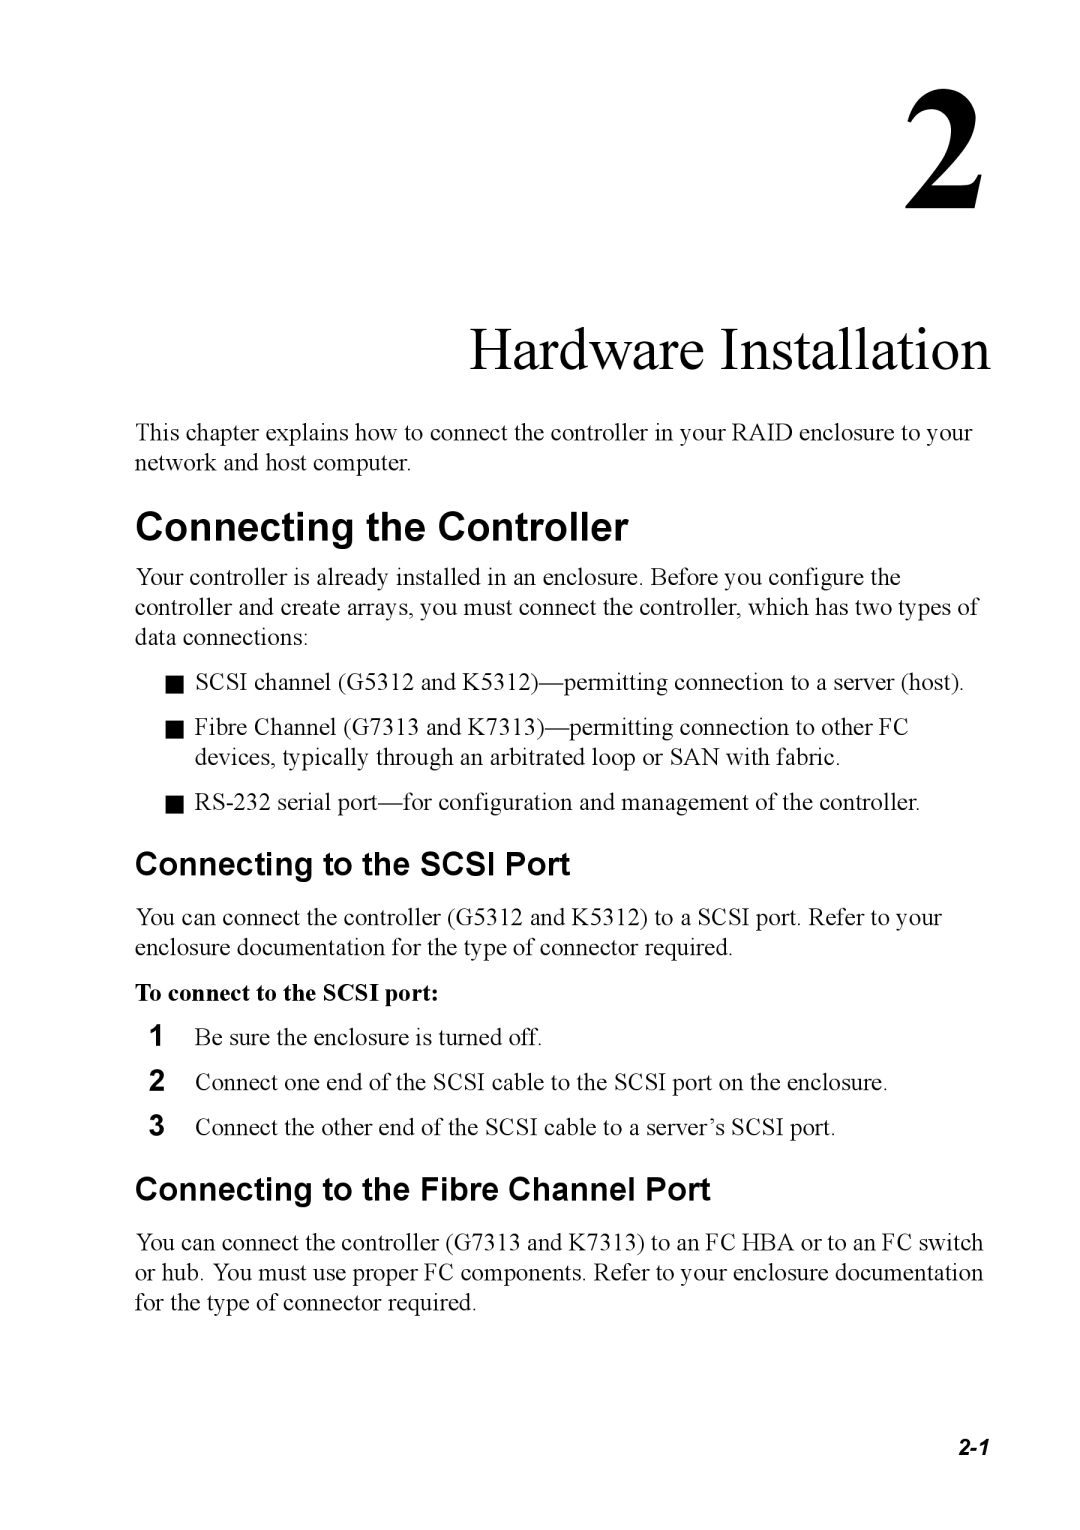 Chaparral G5312/G7313, K5312/K7313 manual Hardware Installation, Connecting the Controller, Connecting to the Scsi Port 